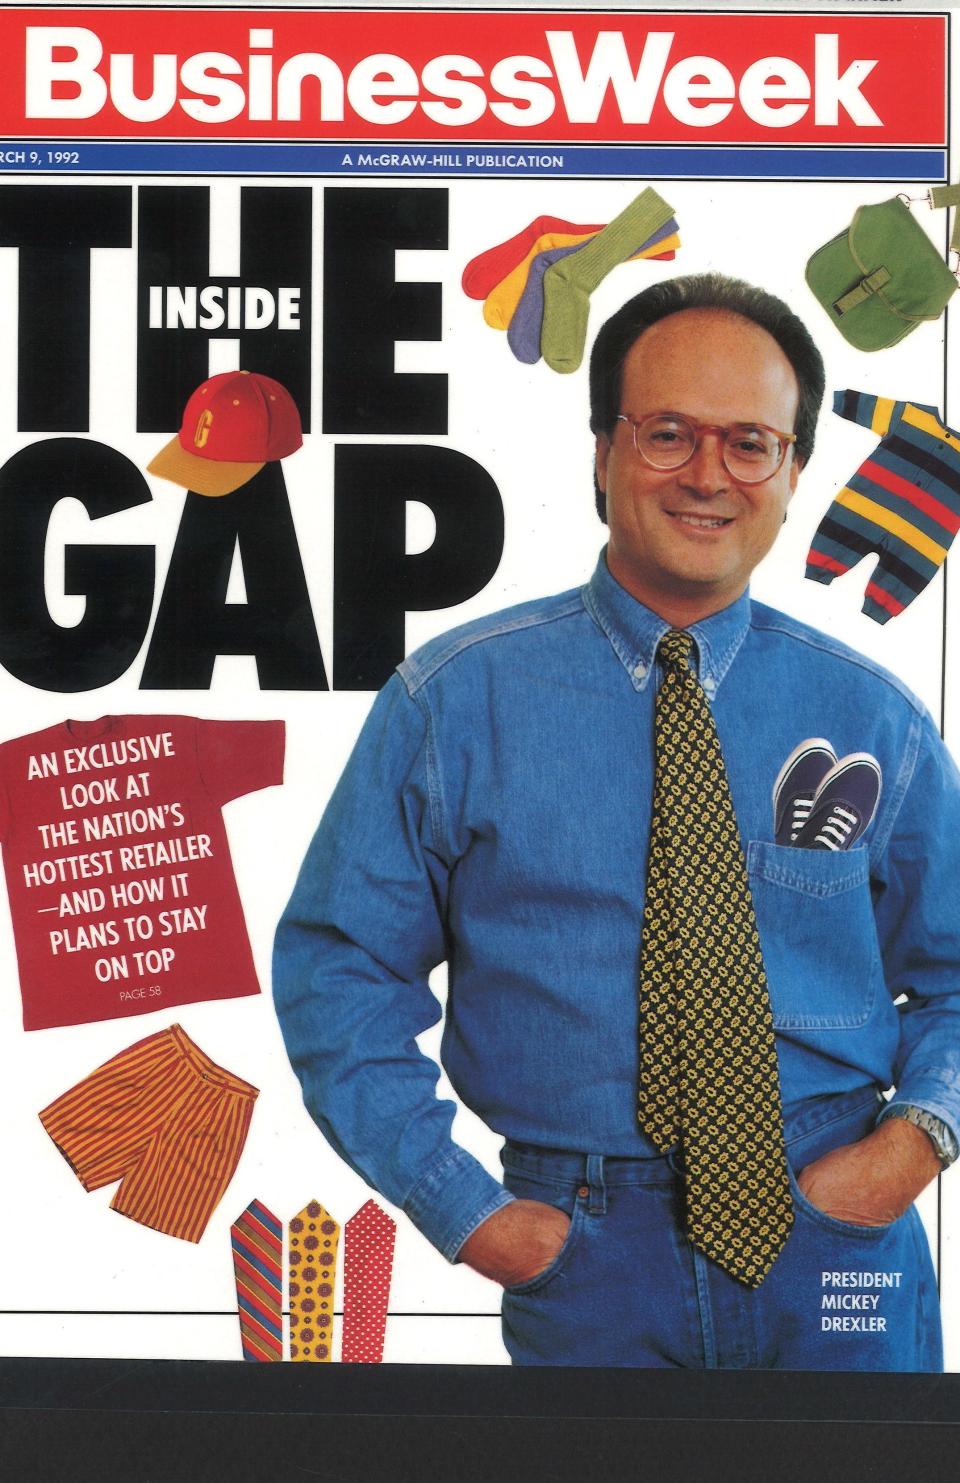 Mickey Drexler on the cover of Business Week in March 1992.